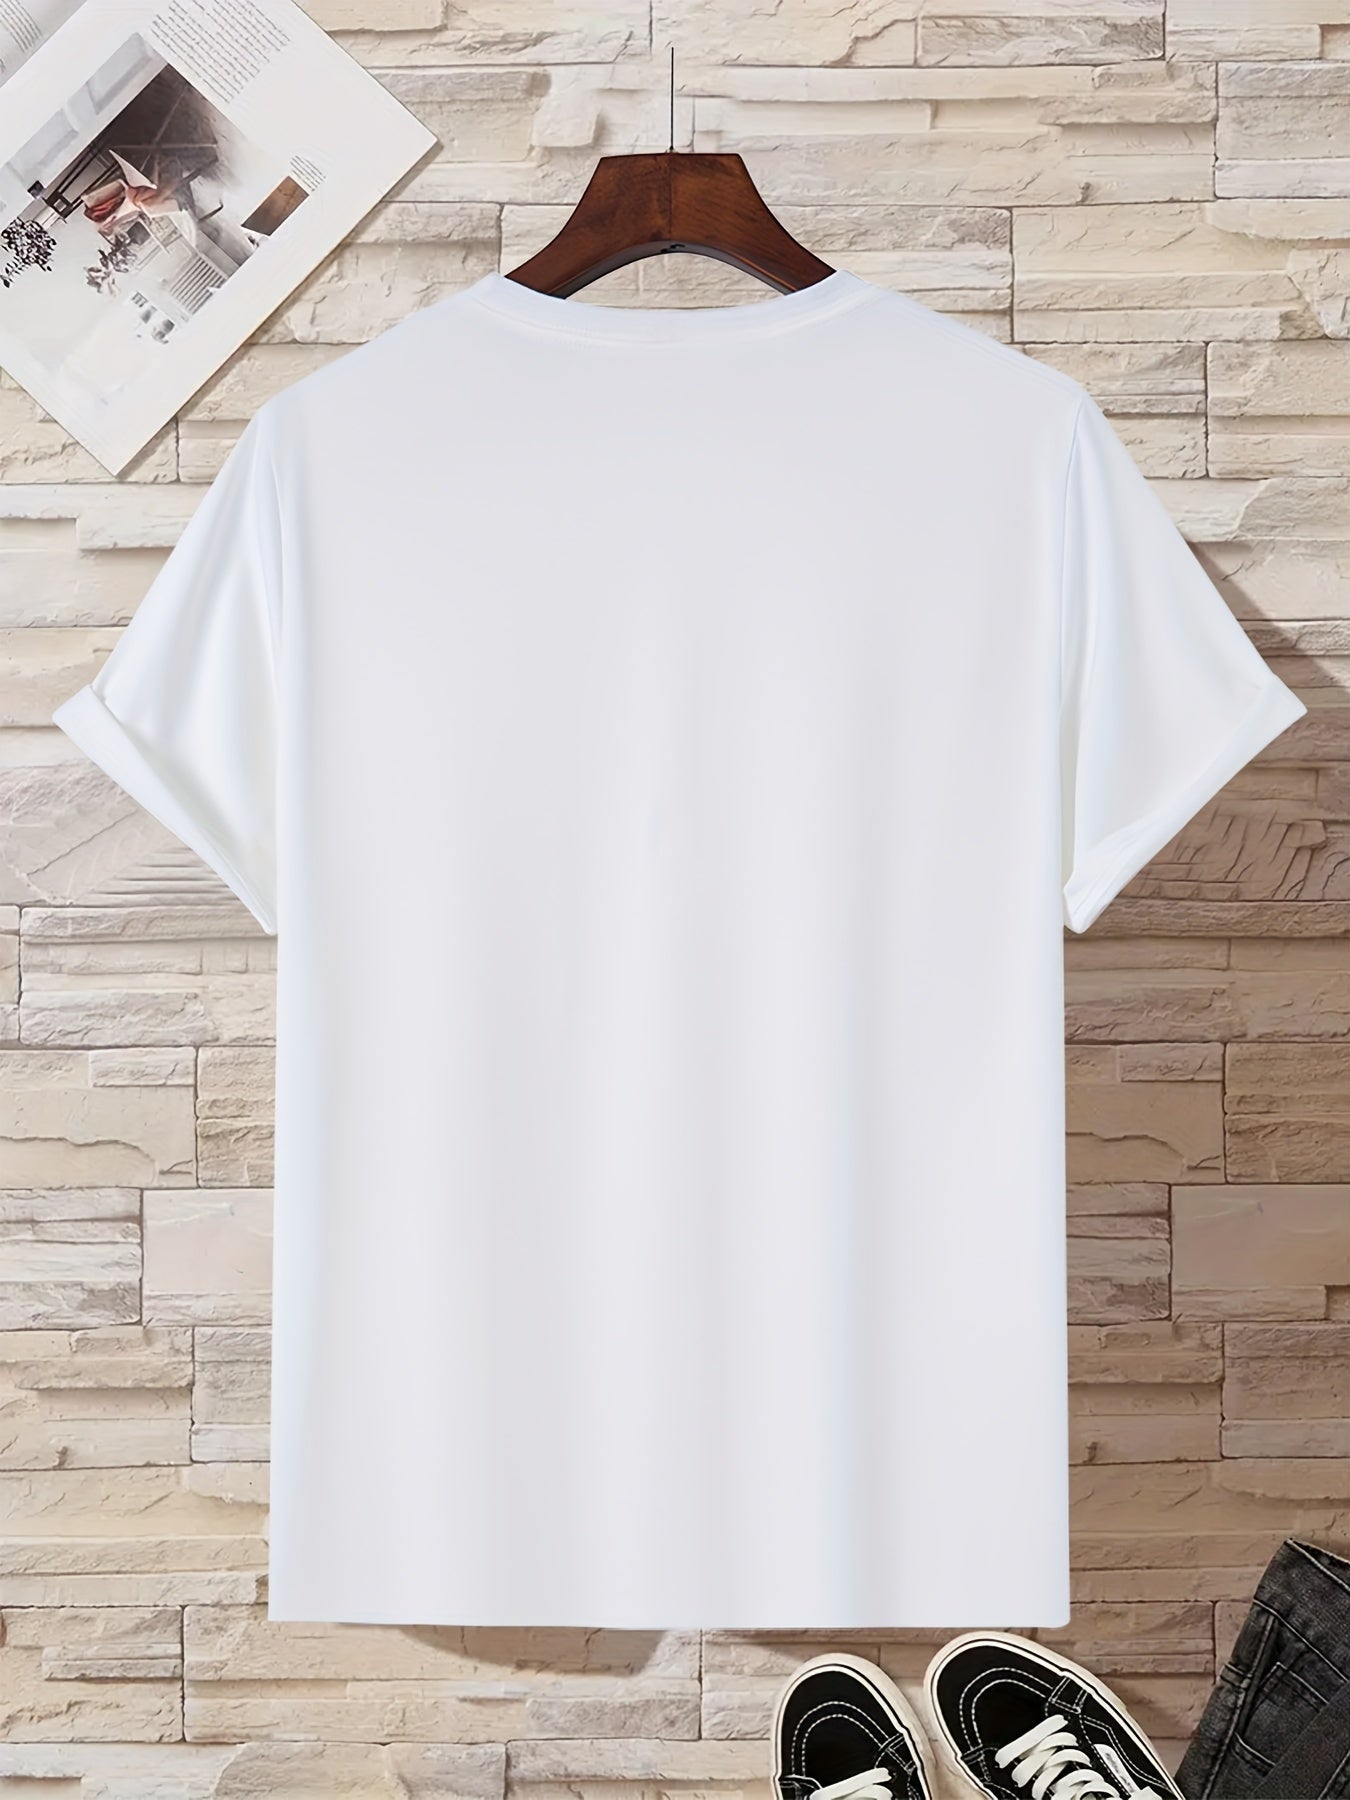 Men's Letter Print T-shirt, Round Neck Tee Casual Clothing, Spring And Summer